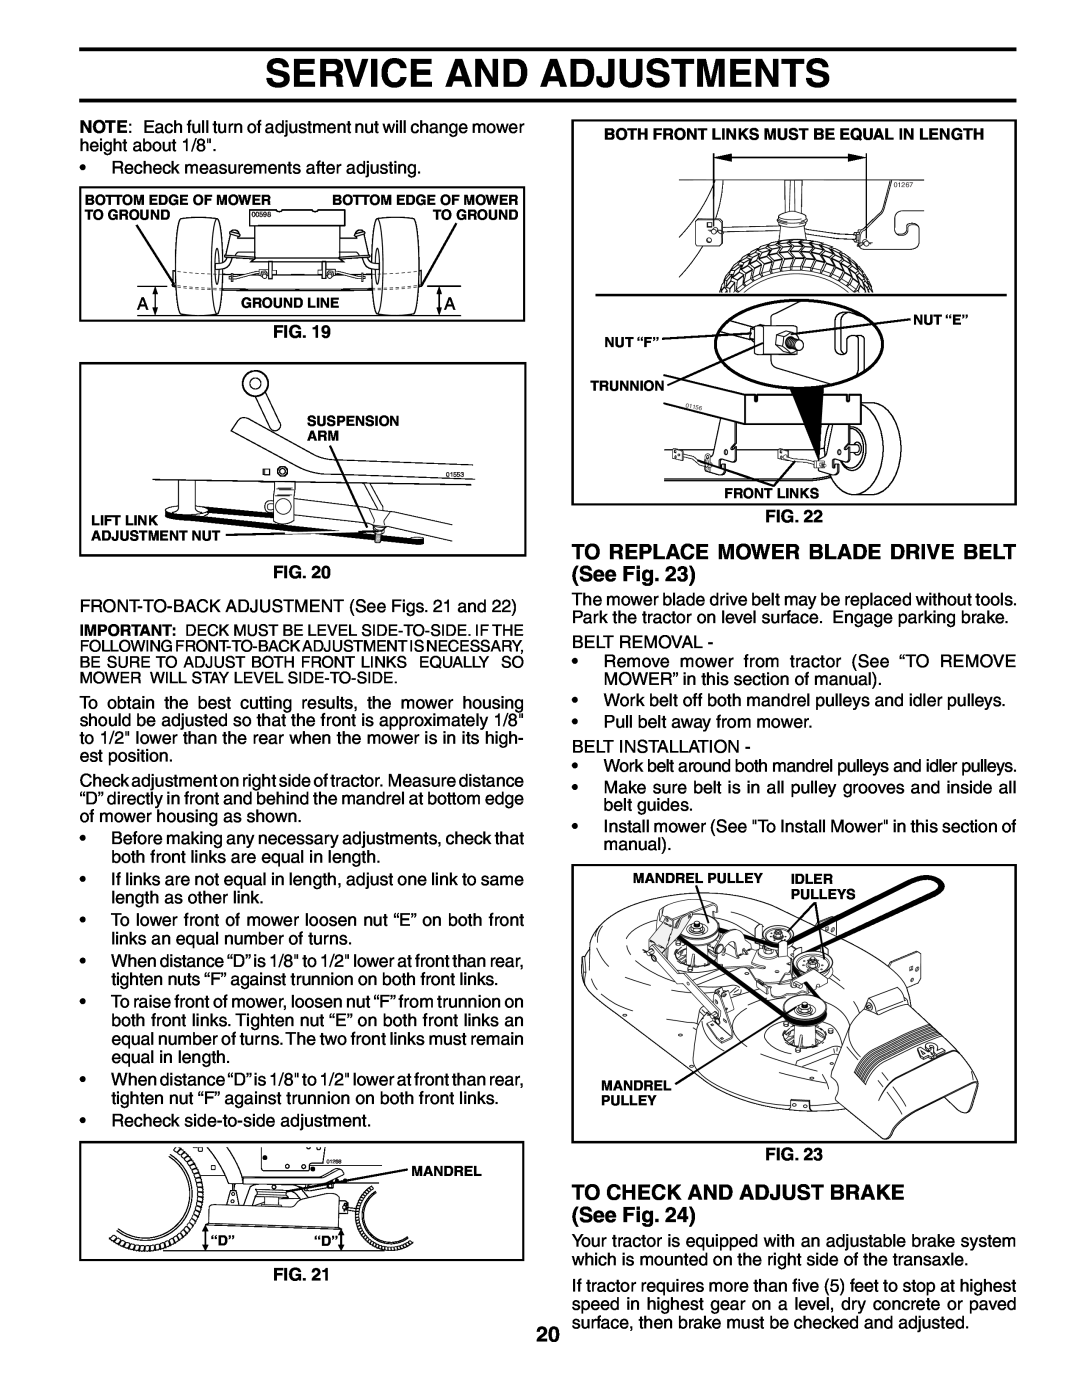 Poulan 954567833 TO REPLACE MOWER BLADE DRIVE BELT See Fig, TO CHECK AND ADJUST BRAKE See Fig, Service And Adjustments 